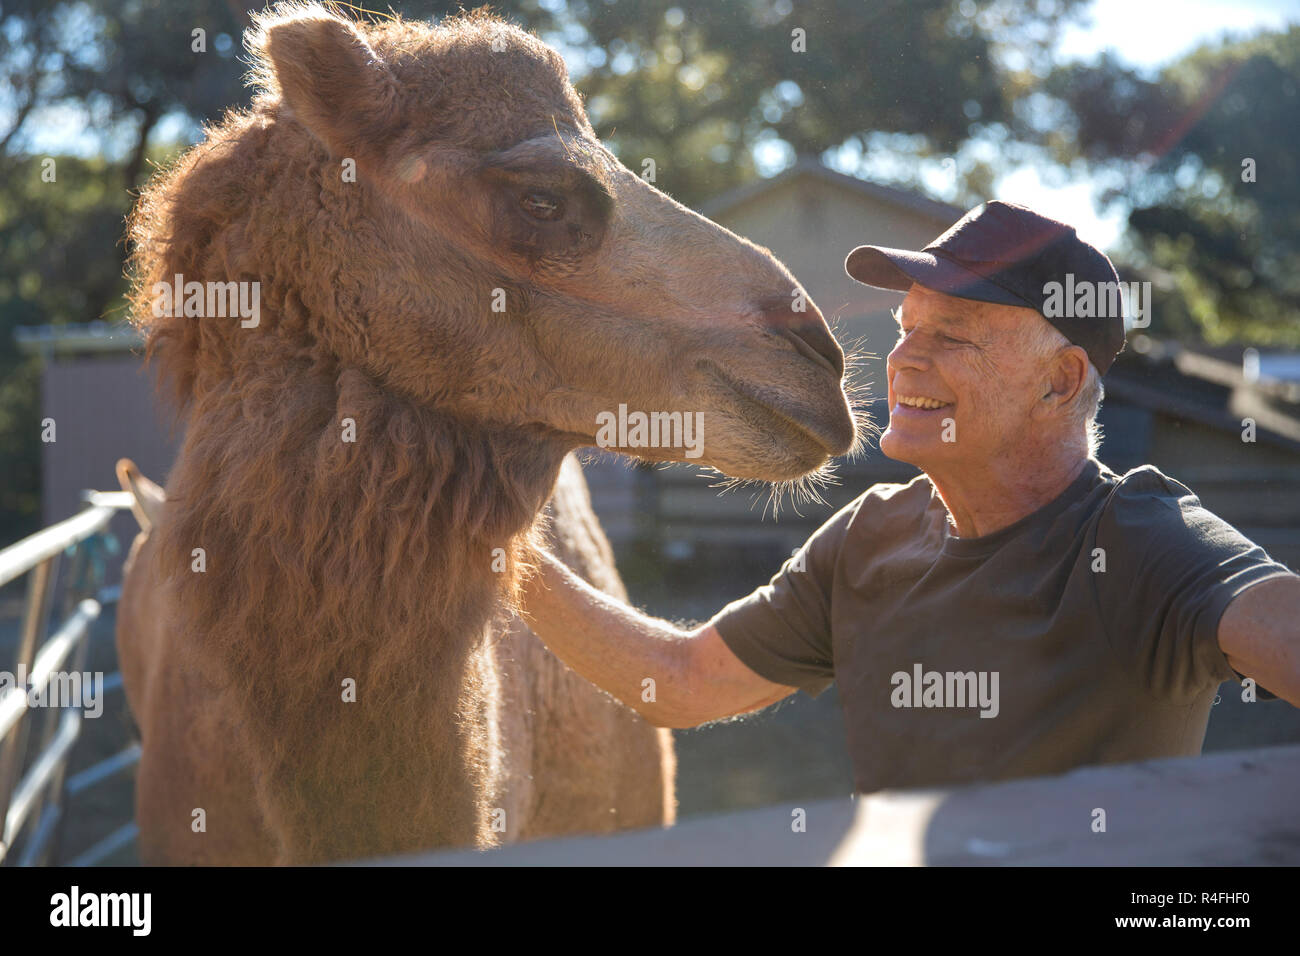 Senior Man & Camel Smiling At Each Other Stock Photo